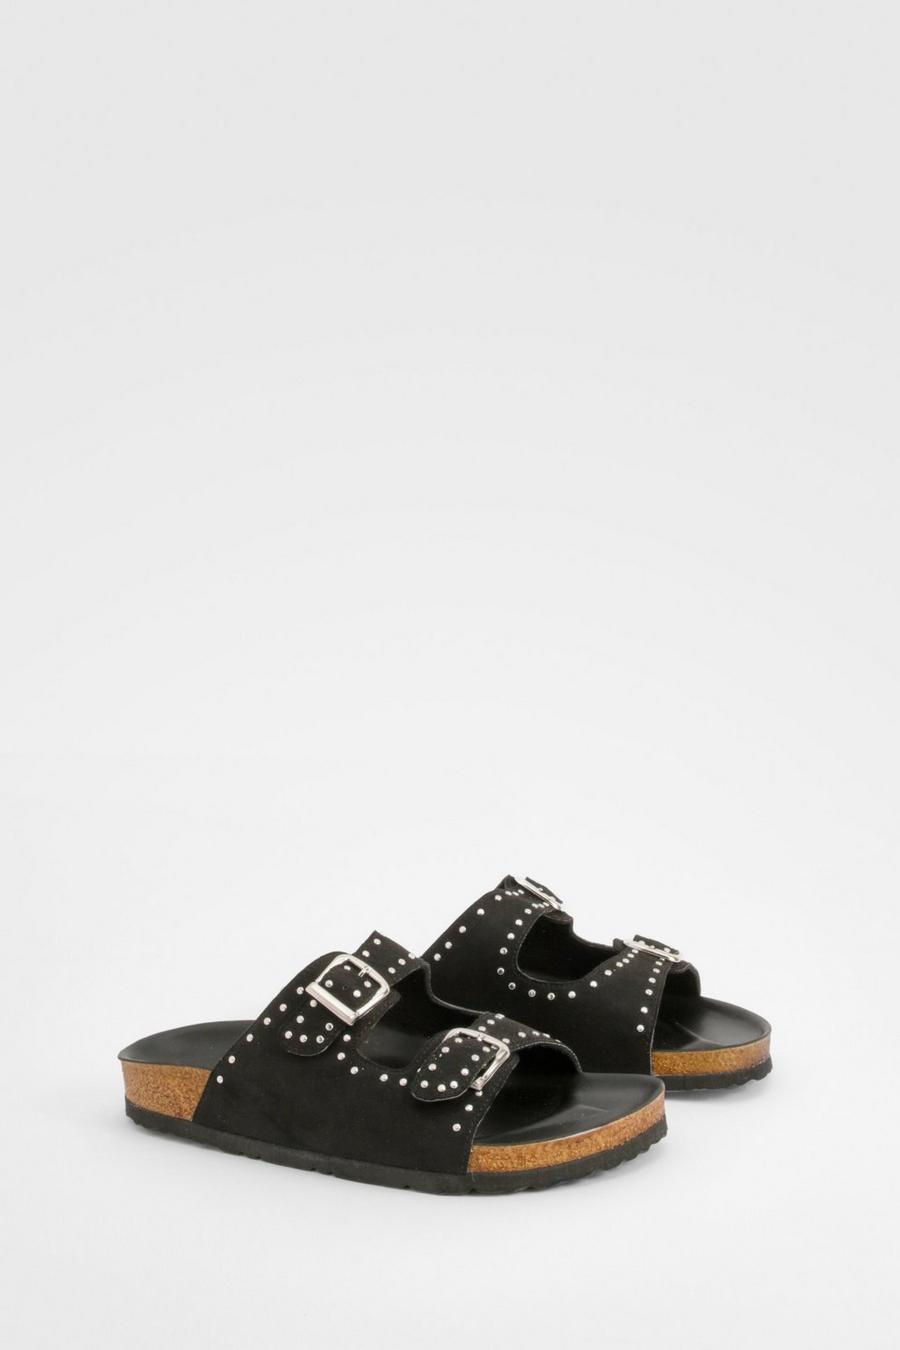 Black Wide Fit Studded Double Buckle Footbed Sliders